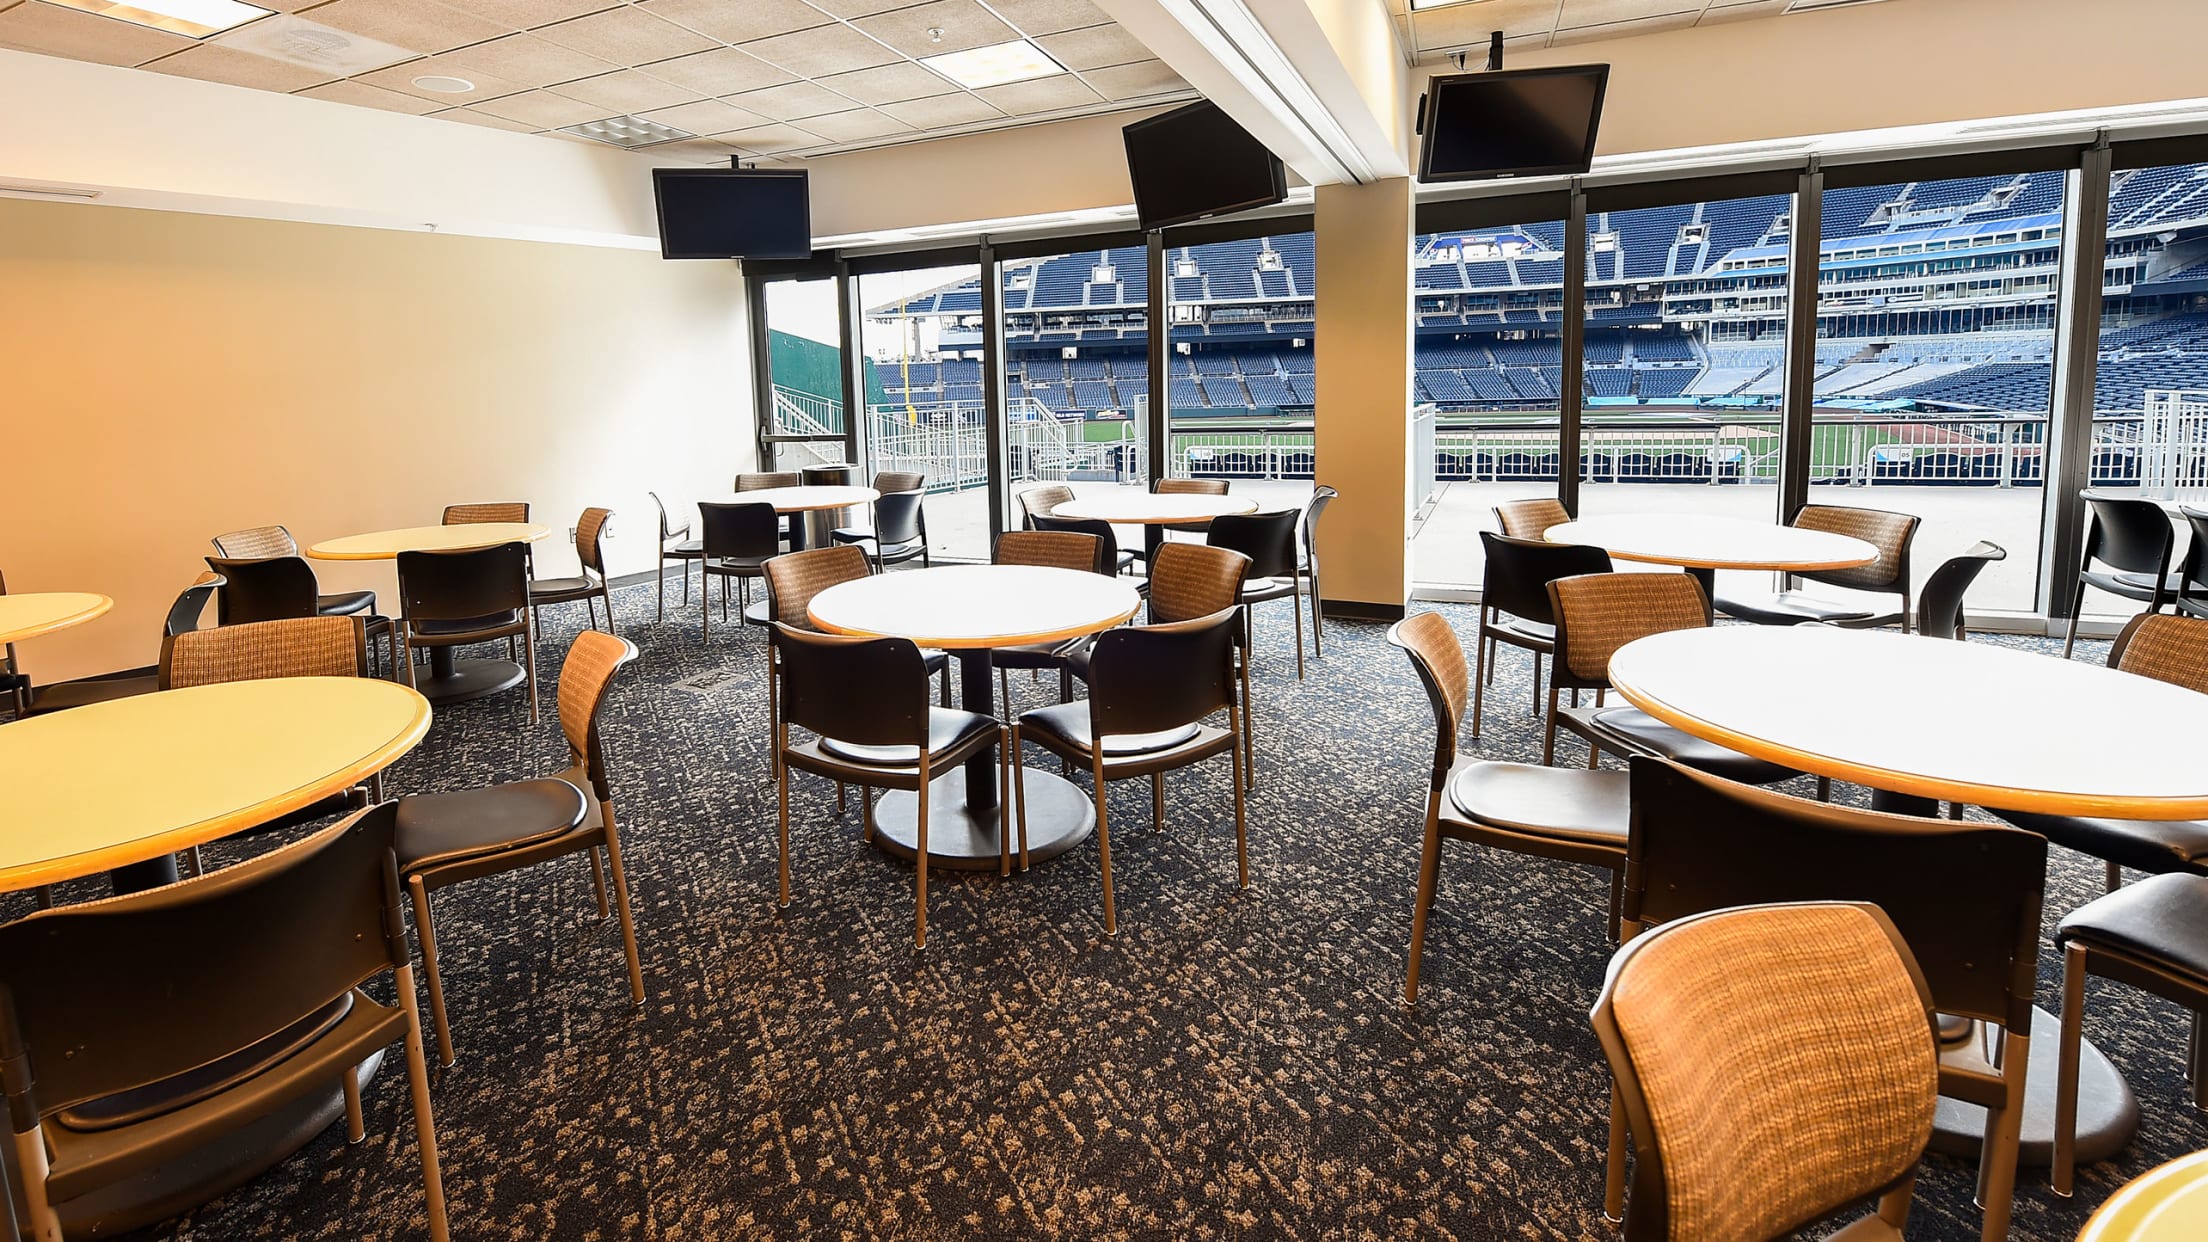 The Royals Authentics Shop is located at Kauffman Stadium inside